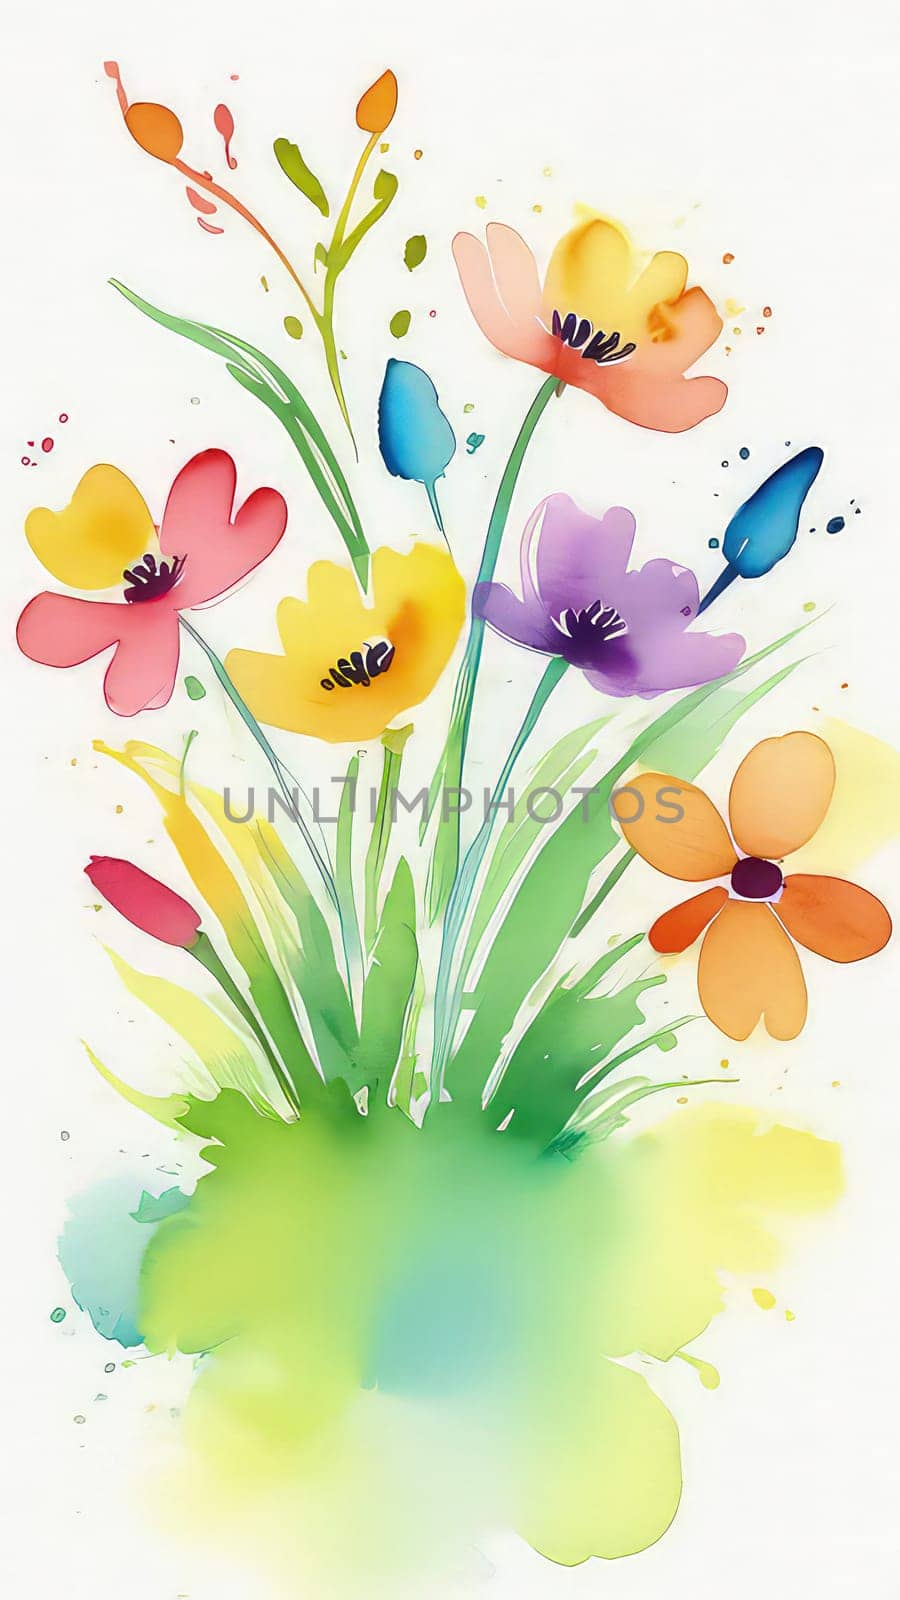 Beautiful celebration spring flowers on pastel background. Concept Birthday, Mothers Day, Womens Day, March 8. Spring easter flower background. Spring, easter greeting card design layout. Copy space. by Angelsmoon